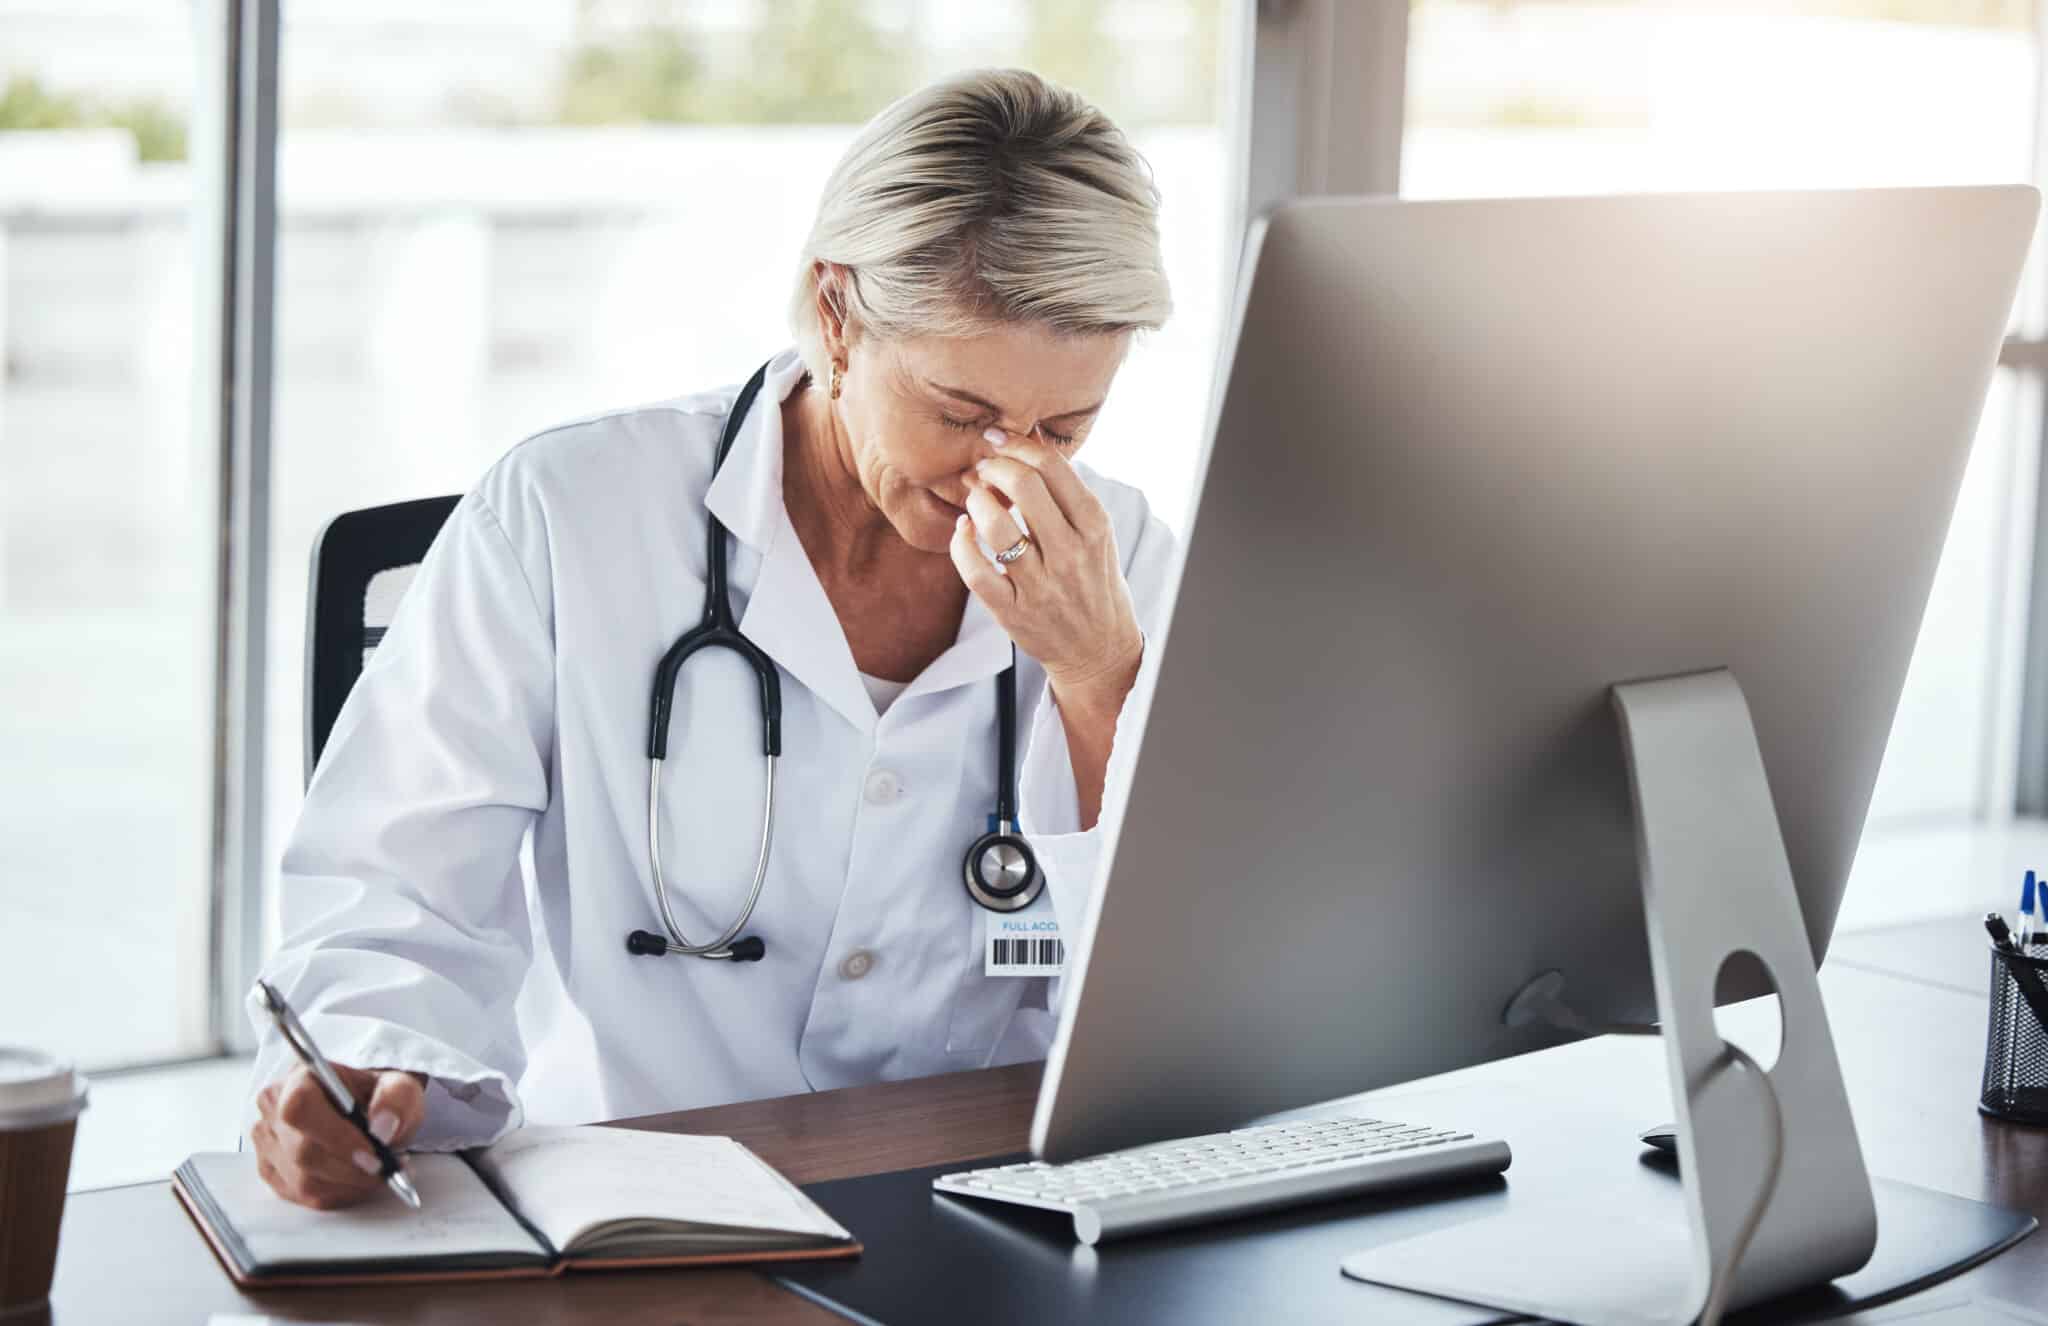 Explore the impact of poor EHR design on physicians, patients, and healthcare revenue. Athreon AxiScribe offers a solution to improve healthcare experiences.